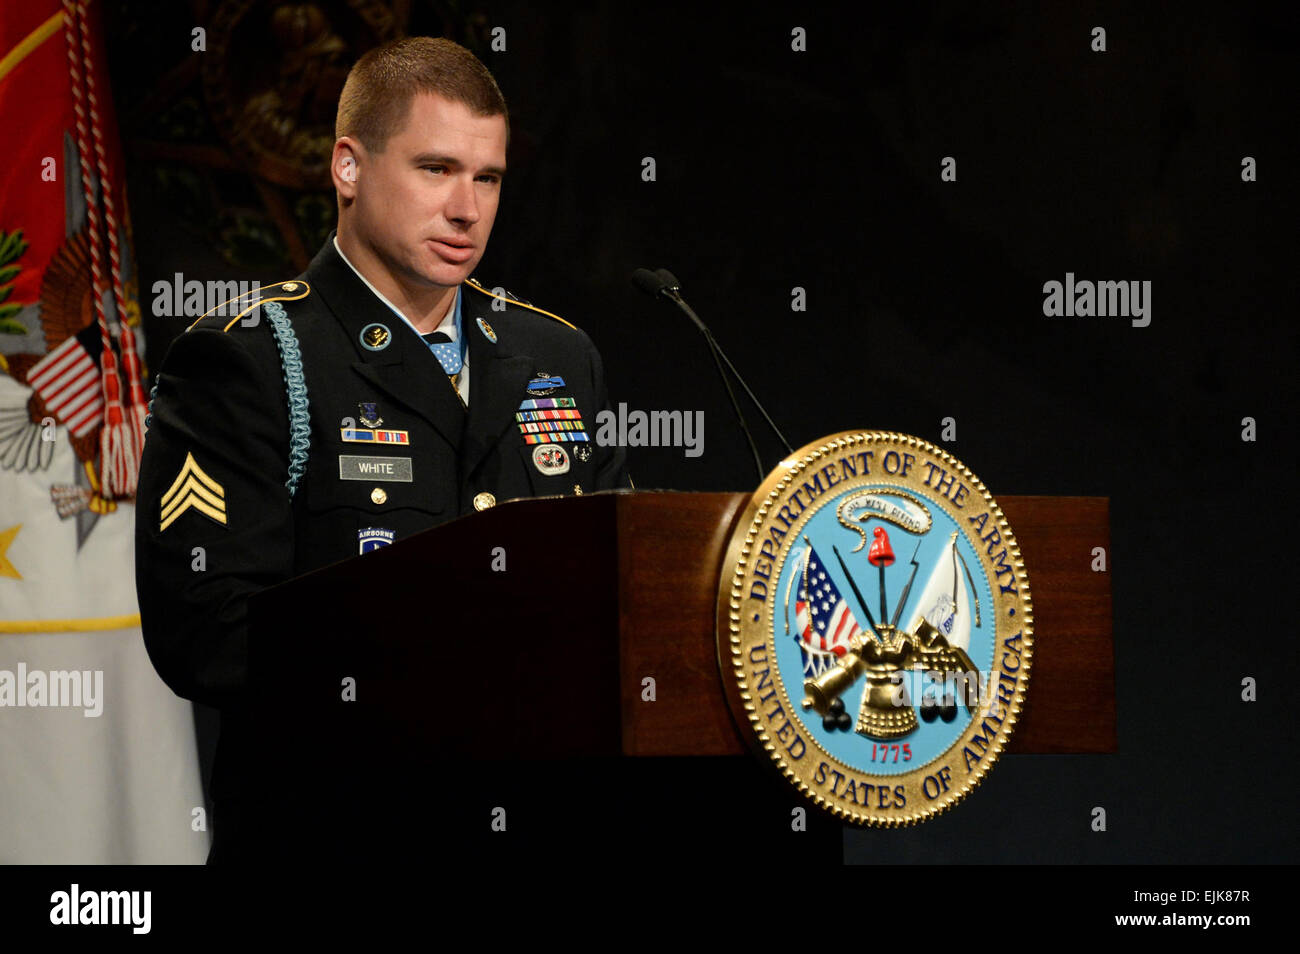 Medal of Honor recipient former U.S. Army Sgt. Kyle White speaks during his Hall of Heroes induction ceremony at the Pentagon in Washington, D.C., May 14, 2014. White was recognized for his actions during his deployment to Afghanistan in 2007 while serving with Chosen Company, 2nd Battalion Airborne, 503rd Infantry Regiment, 173rd Airborne Brigade.  U.S. Army  Sgt. Laura Buchta Stock Photo